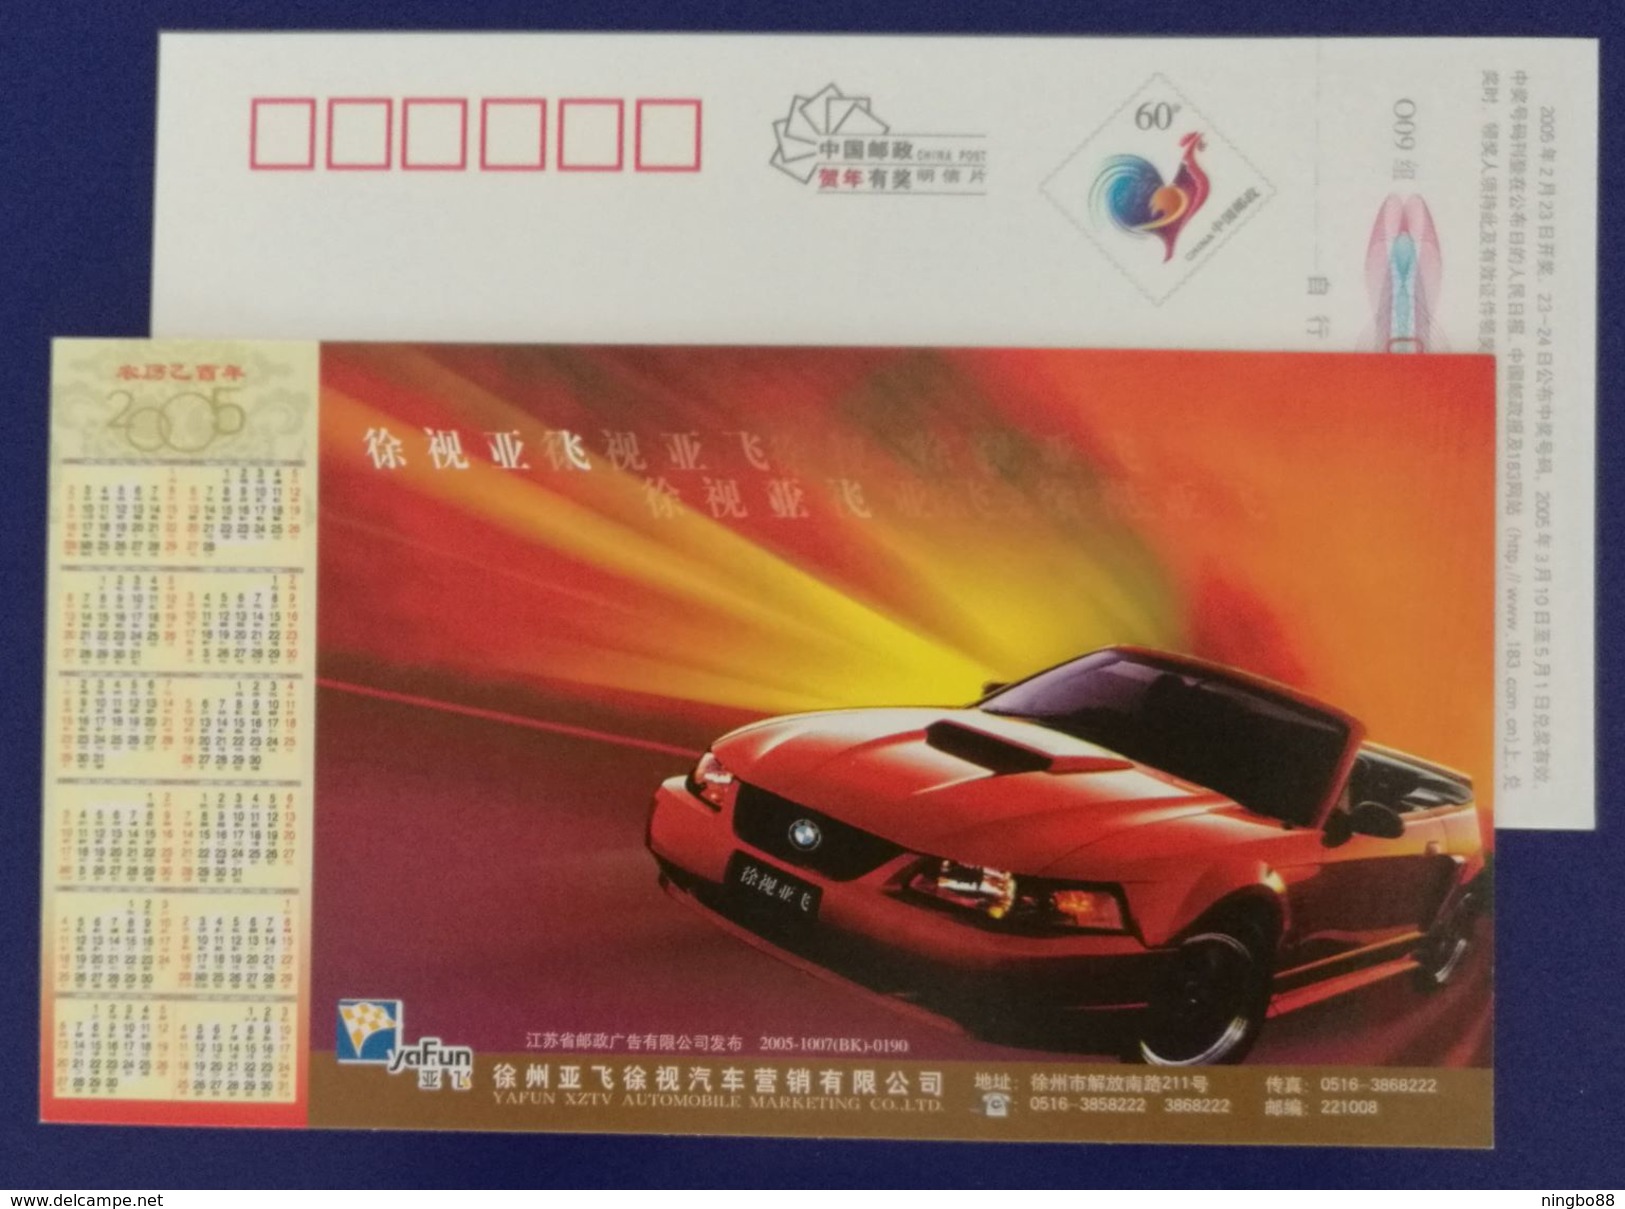 BMW Deluxe Convertible Car,China 2005 Xuzhou Automobile Marketing Company Advertising Pre-stamped Card - Automobili